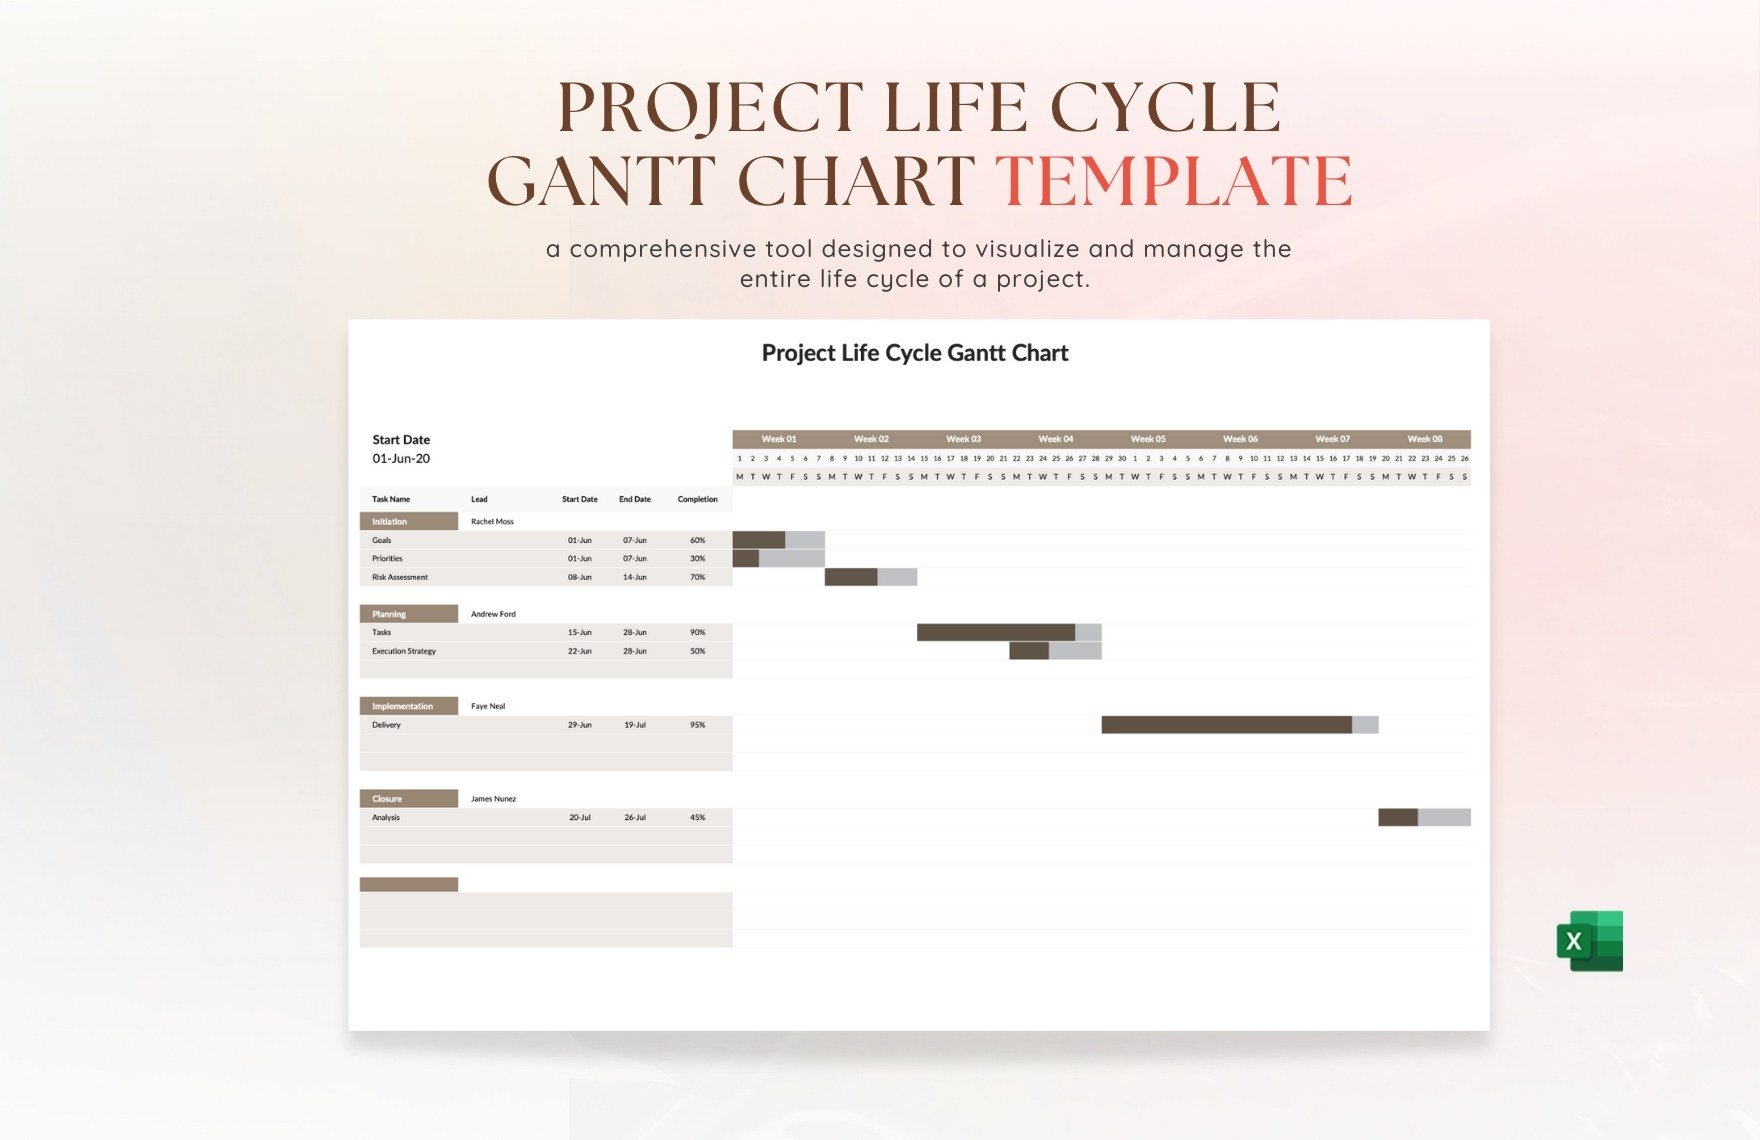 Project Life Cycle Gantt Chart Template in Excel